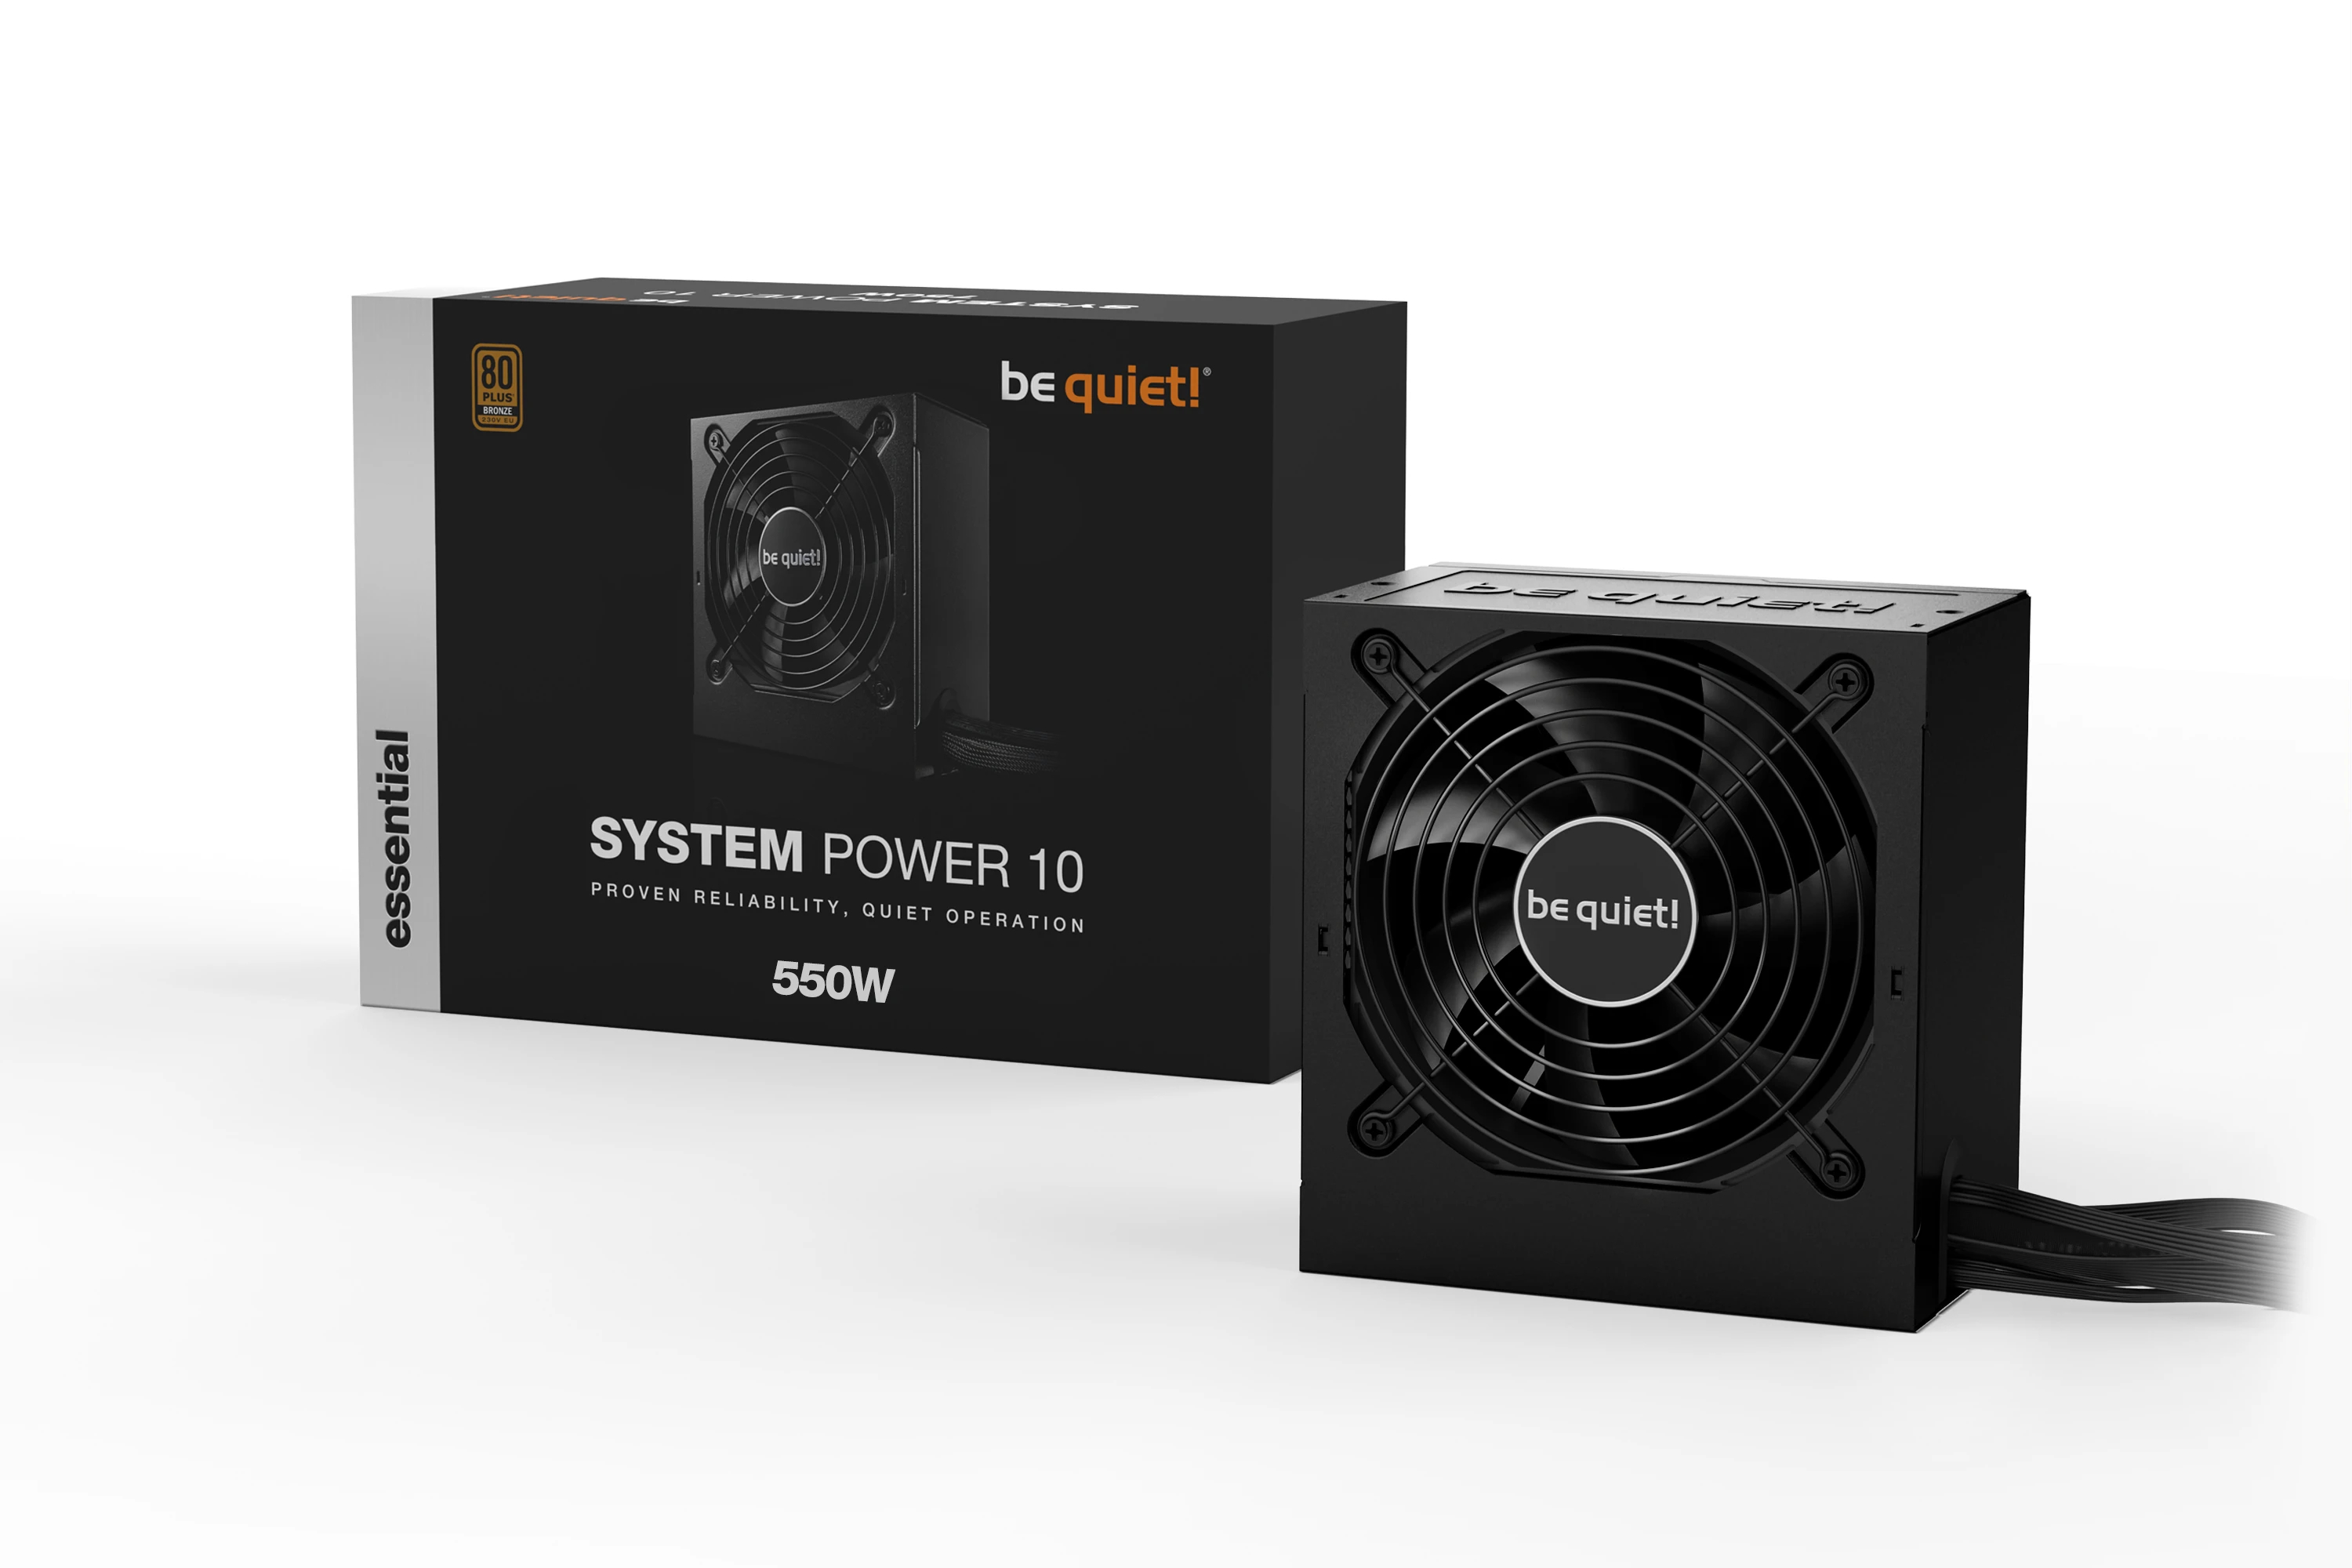 be quiet! SYSTEM POWER 10 550W, 80 Plus Bronze, Temperature-controlled 120mm fan, Cable Management - image 2